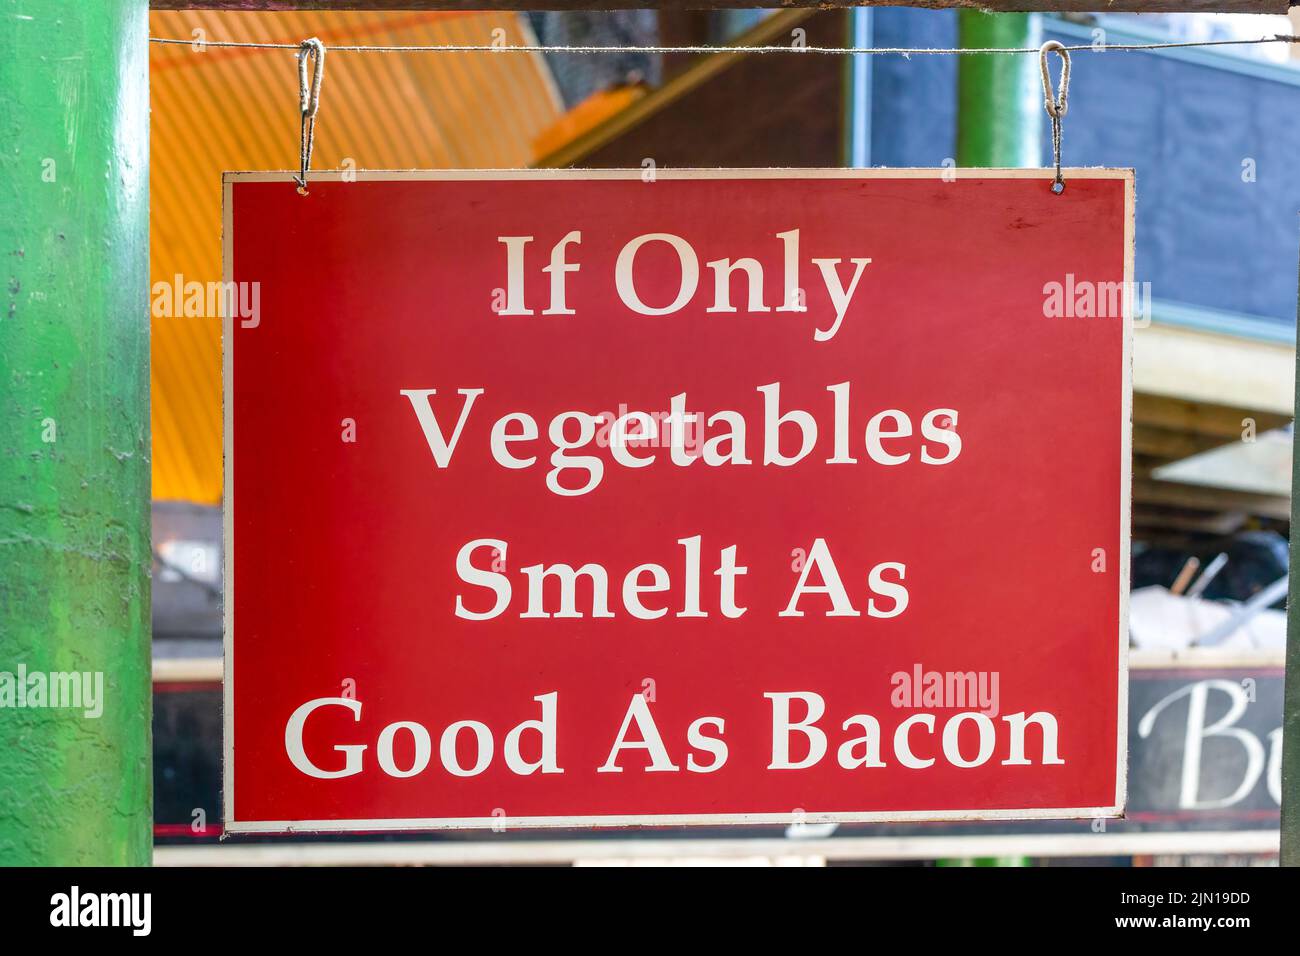 If only vegetables smelt as good as bacon market sign Stock Photo